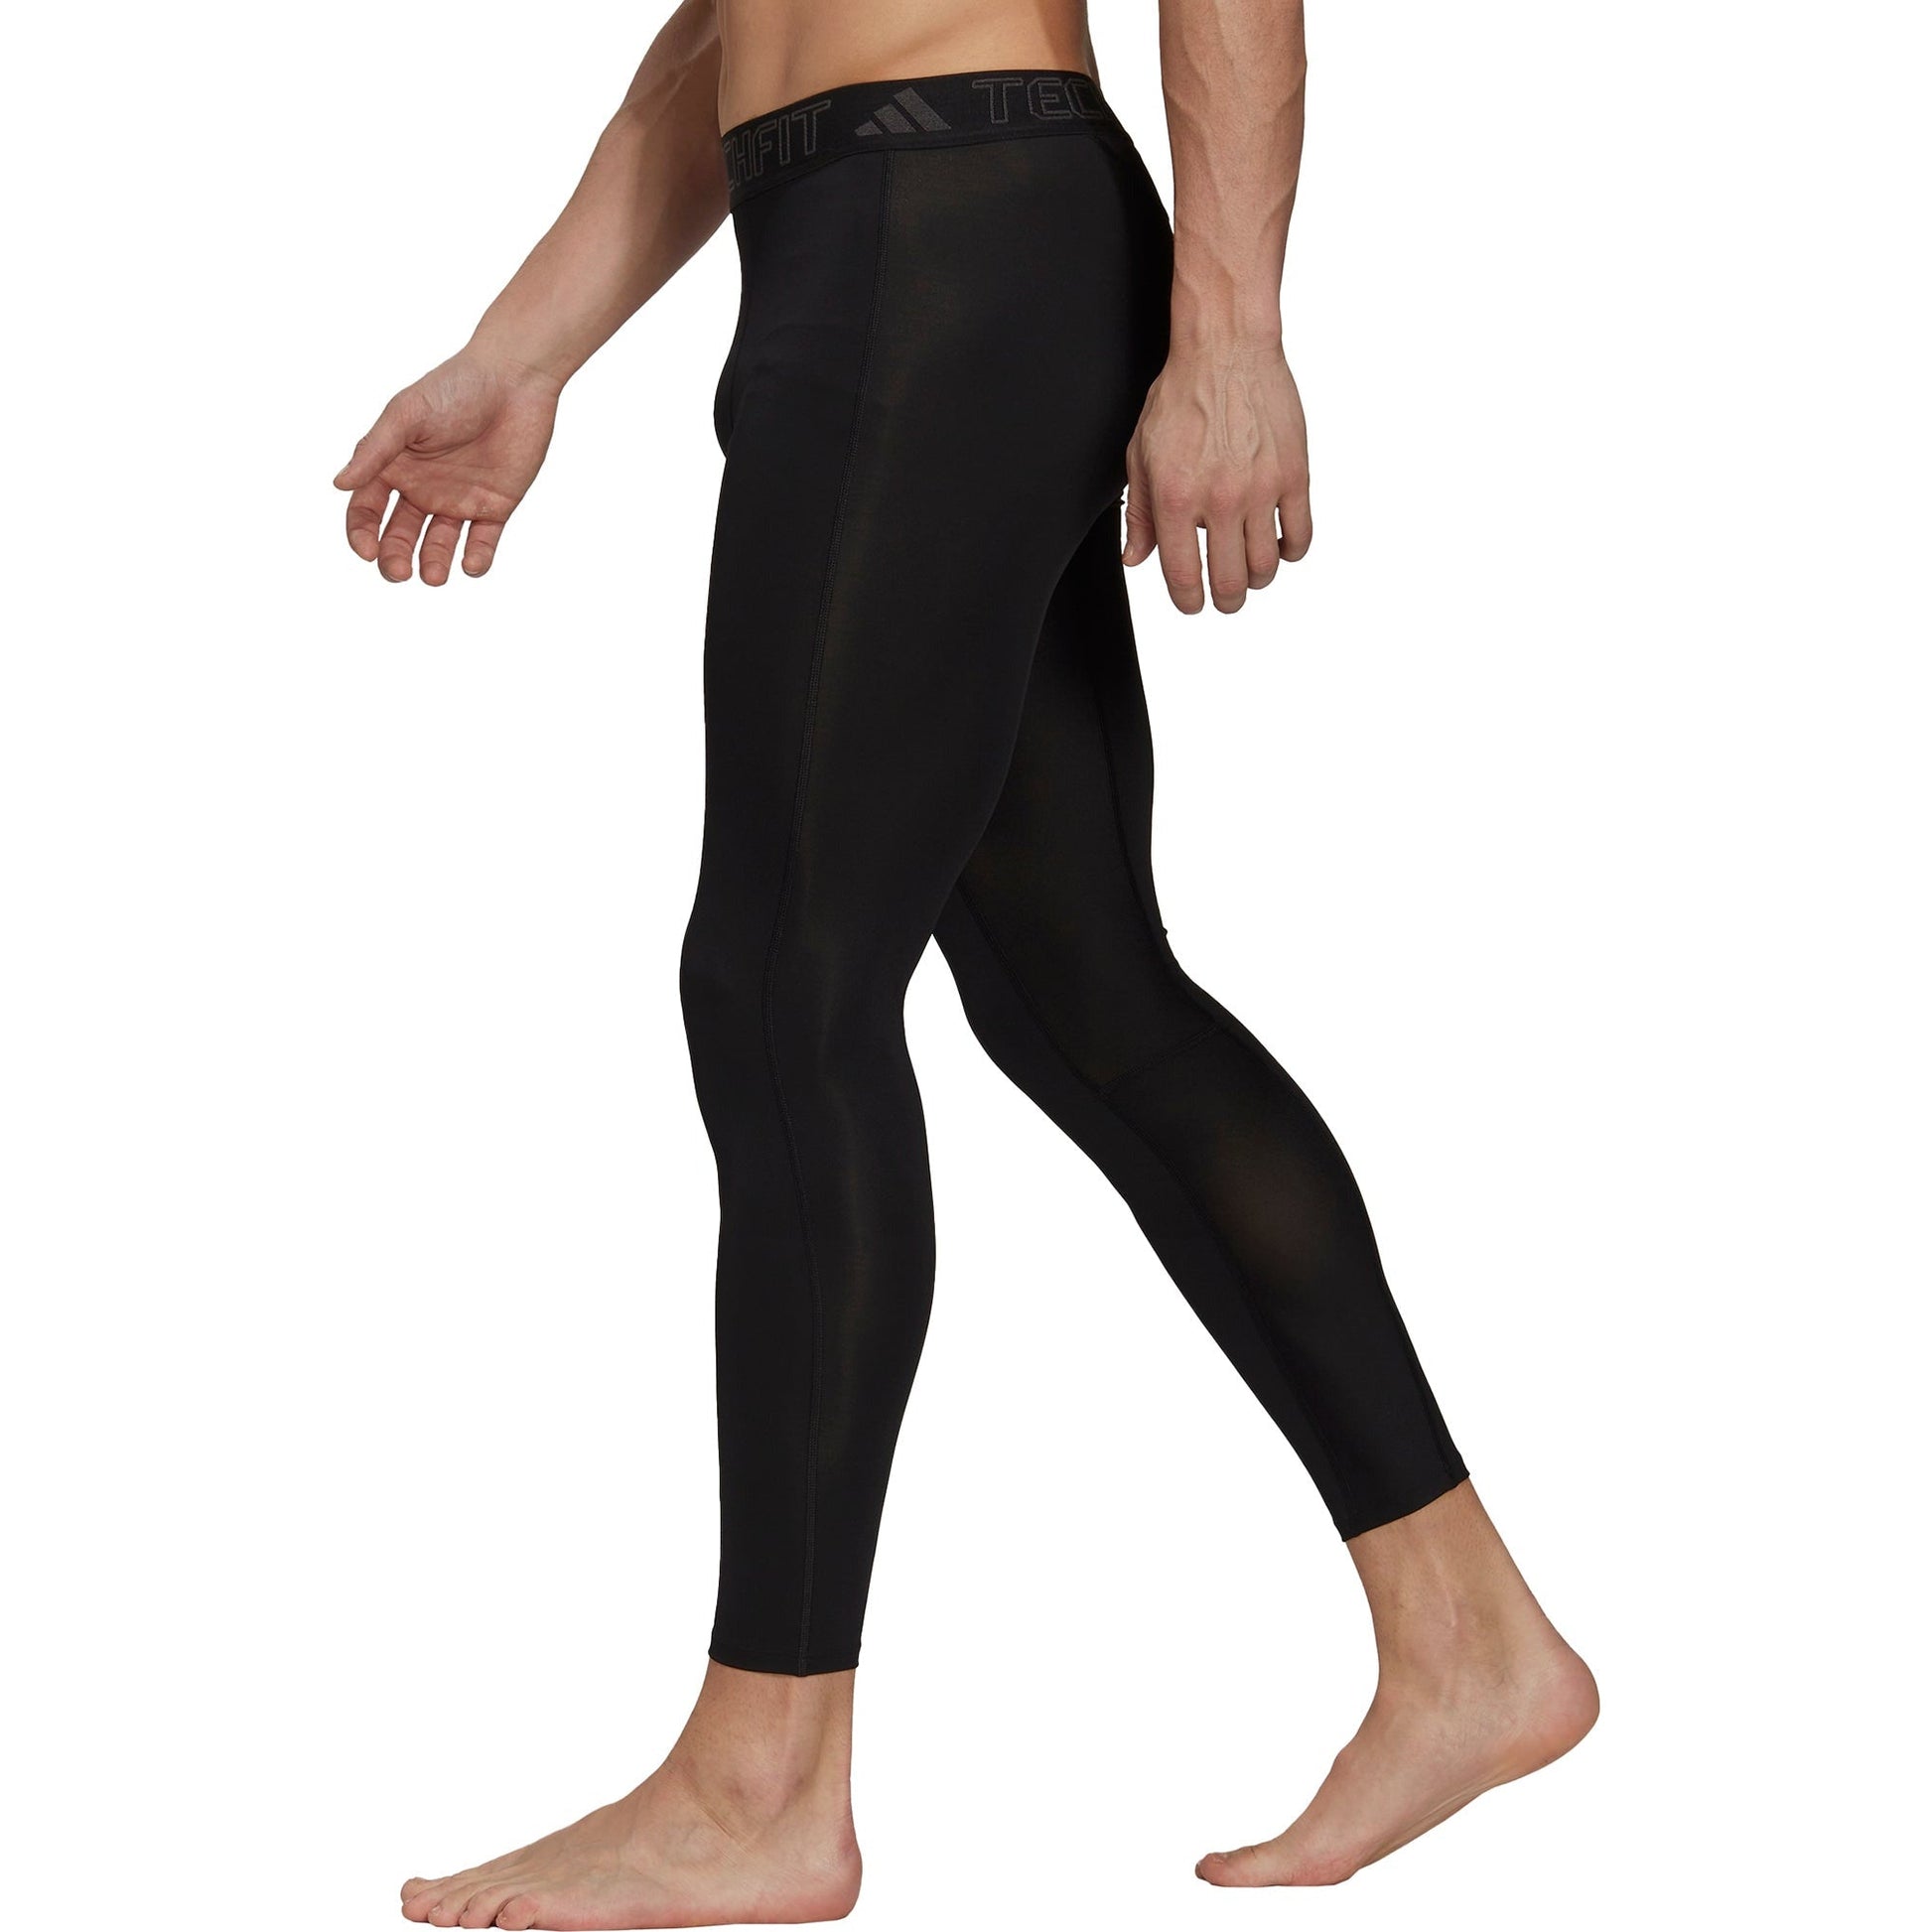 Adidas Tech Fit Aeroready Long Tights Hm6061 Side - Side View